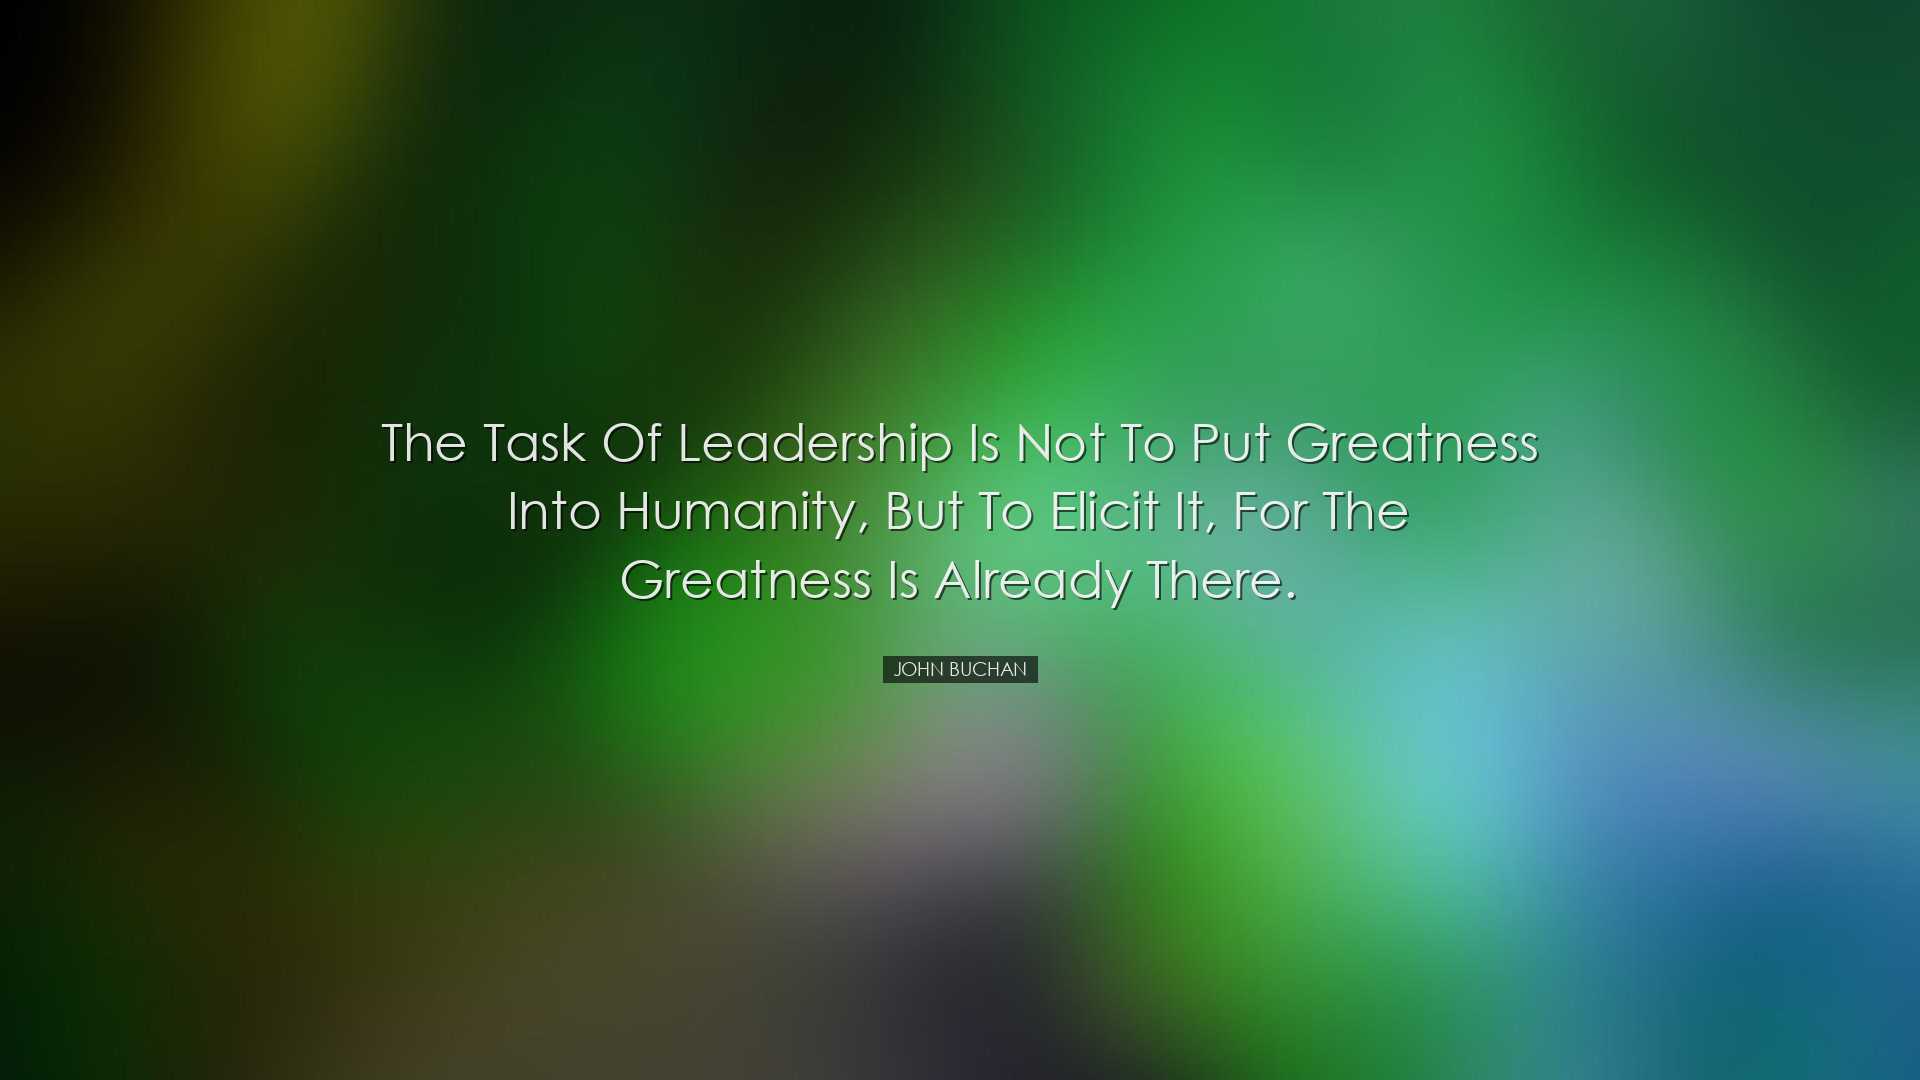 The task of leadership is not to put greatness into humanity, but